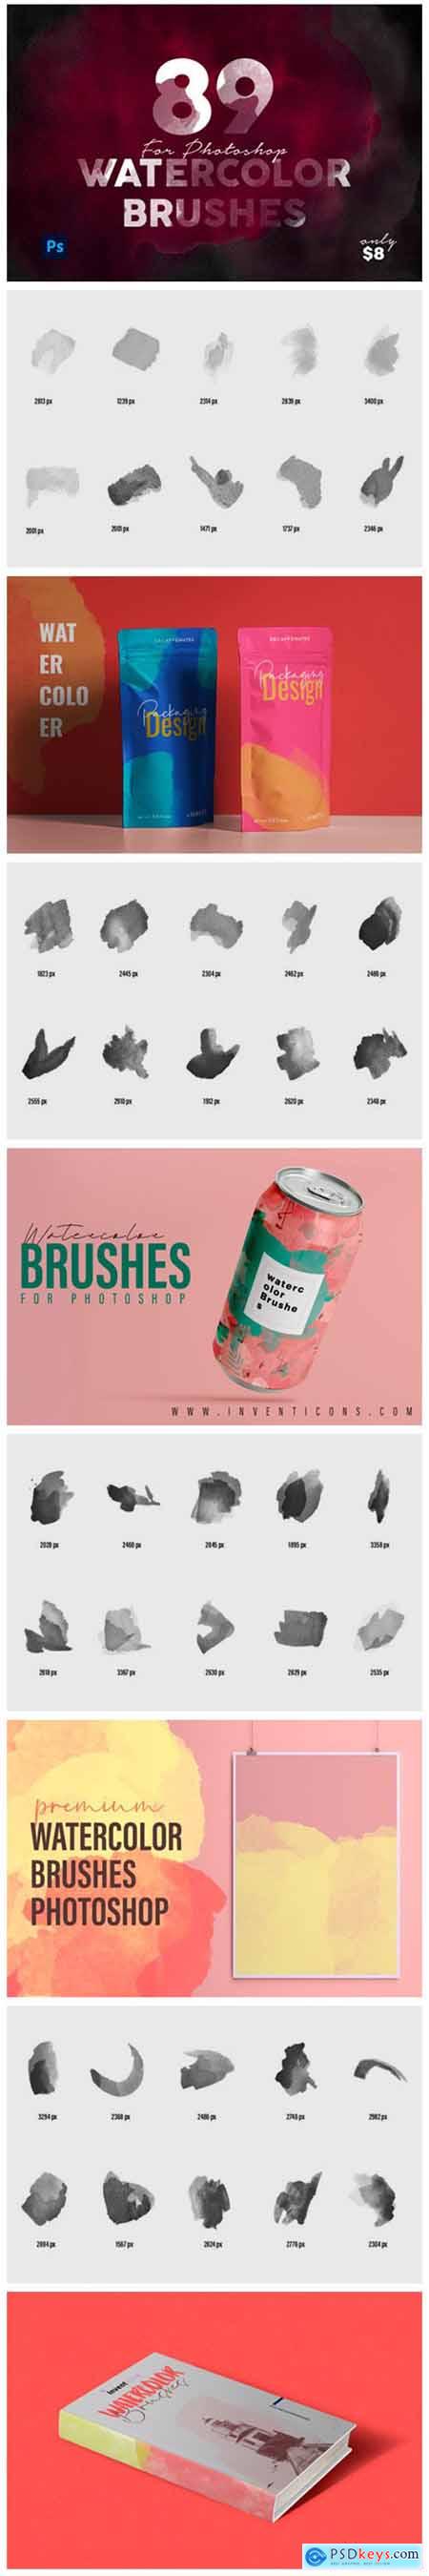 Realistic Watercolor Photoshop Brushes 11528690